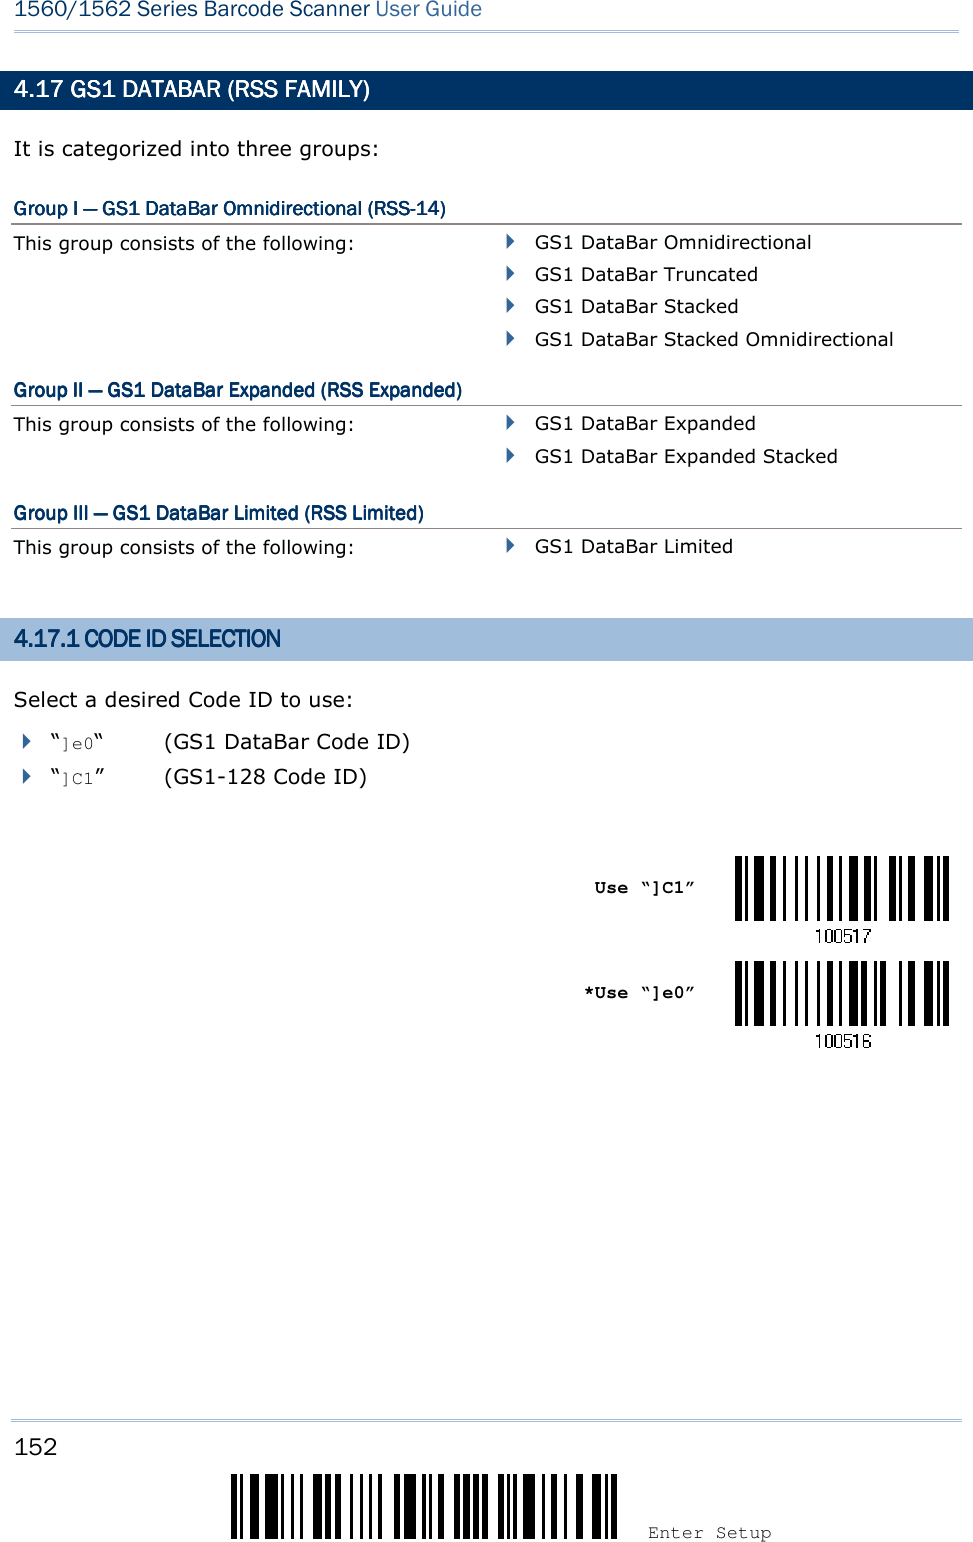 152 Enter Setup 1560/1562 Series Barcode Scanner User Guide  4.14.14.14.17777    GS1 DAGS1 DAGS1 DAGS1 DATATATATABBBBAR (AR (AR (AR (RSS FAMILYRSS FAMILYRSS FAMILYRSS FAMILY))))    It is categorized into three groups: Group I Group I Group I Group I ————    GS1 DataBar Omnidirectional (RSSGS1 DataBar Omnidirectional (RSSGS1 DataBar Omnidirectional (RSSGS1 DataBar Omnidirectional (RSS----14)14)14)14)    This group consists of the following:     GS1 DataBar Omnidirectional  GS1 DataBar Truncated    GS1 DataBar Stacked  GS1 DataBar Stacked Omnidirectional GrouGrouGrouGroup IIp IIp IIp II    ————    GS1 DataBar Expanded (RSS Expanded)GS1 DataBar Expanded (RSS Expanded)GS1 DataBar Expanded (RSS Expanded)GS1 DataBar Expanded (RSS Expanded)    This group consists of the following:     GS1 DataBar Expanded  GS1 DataBar Expanded Stacked Group III Group III Group III Group III ————    GS1 DataBar Limited (RSS Limited)GS1 DataBar Limited (RSS Limited)GS1 DataBar Limited (RSS Limited)GS1 DataBar Limited (RSS Limited)    This group consists of the following:     GS1 DataBar Limited 4.14.14.14.17777.1 CODE I.1 CODE I.1 CODE I.1 CODE ID SELECTIOND SELECTIOND SELECTIOND SELECTION    Select a desired Code ID to use:  “]e0“  (GS1 DataBar Code ID)  “]C1”  (GS1-128 Code ID)     Use “]C1”     *Use “]e0”        